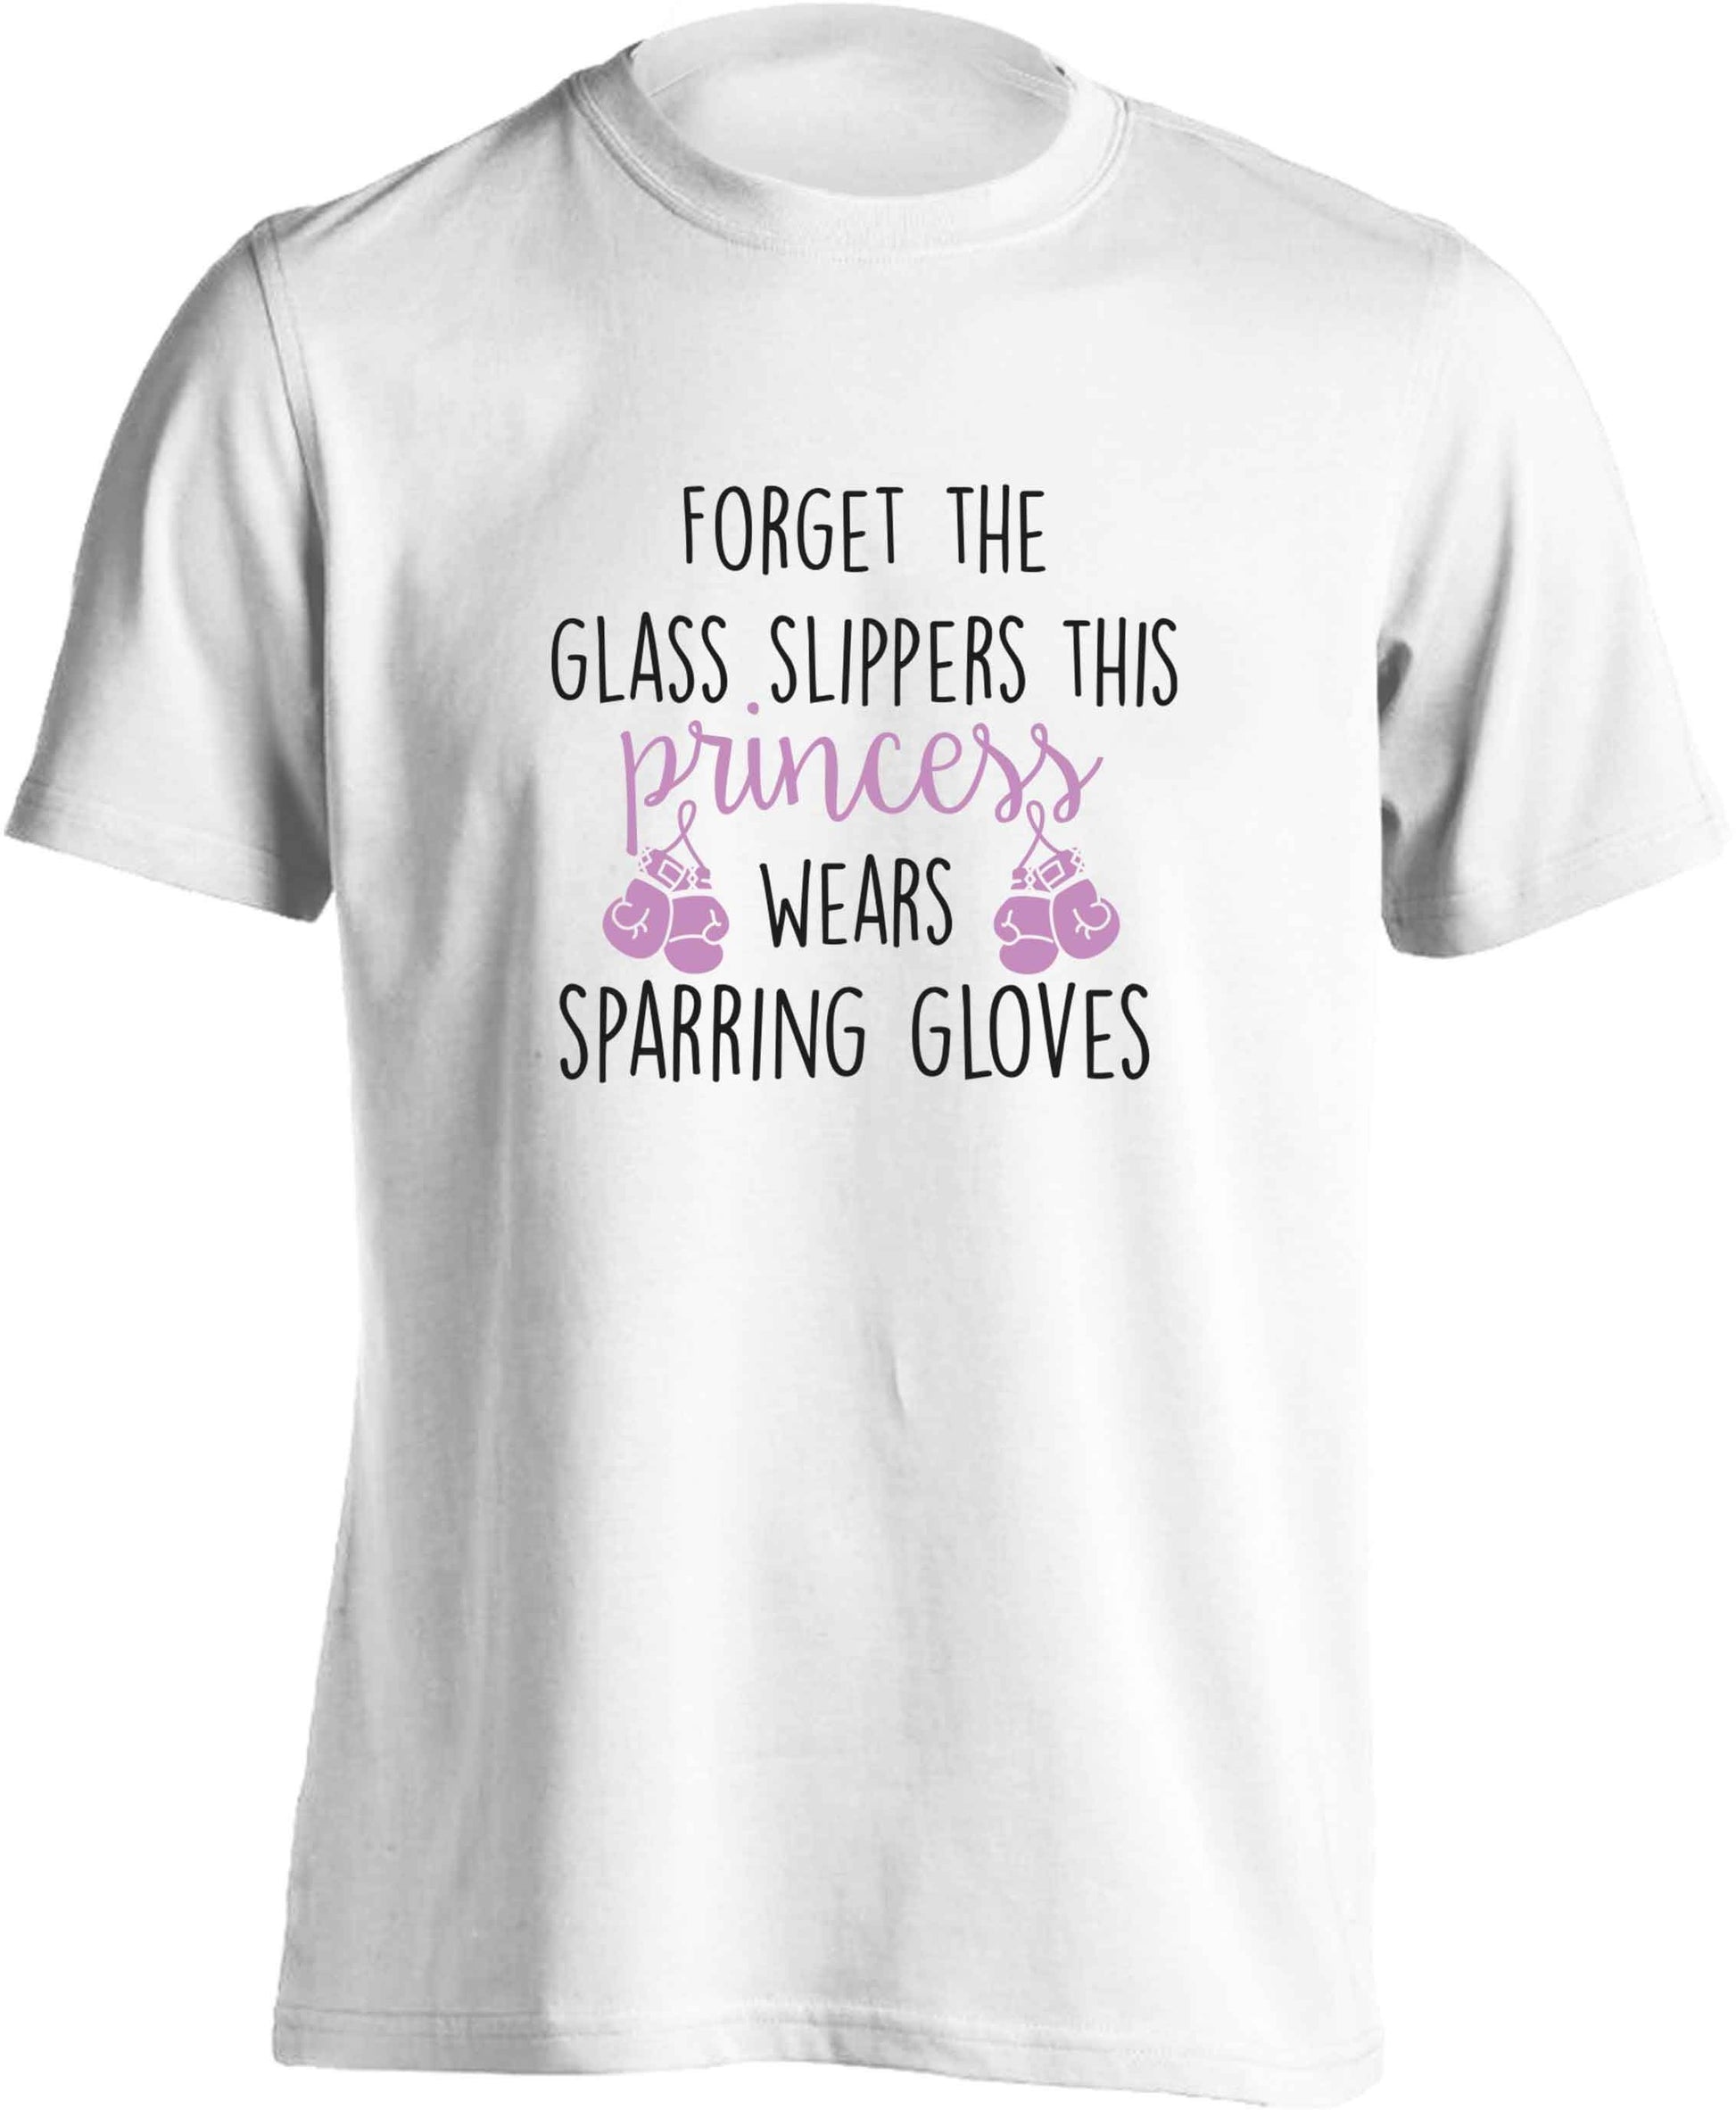 Forget the glass slippers this princess wears sparring gloves adults unisex white Tshirt 2XL